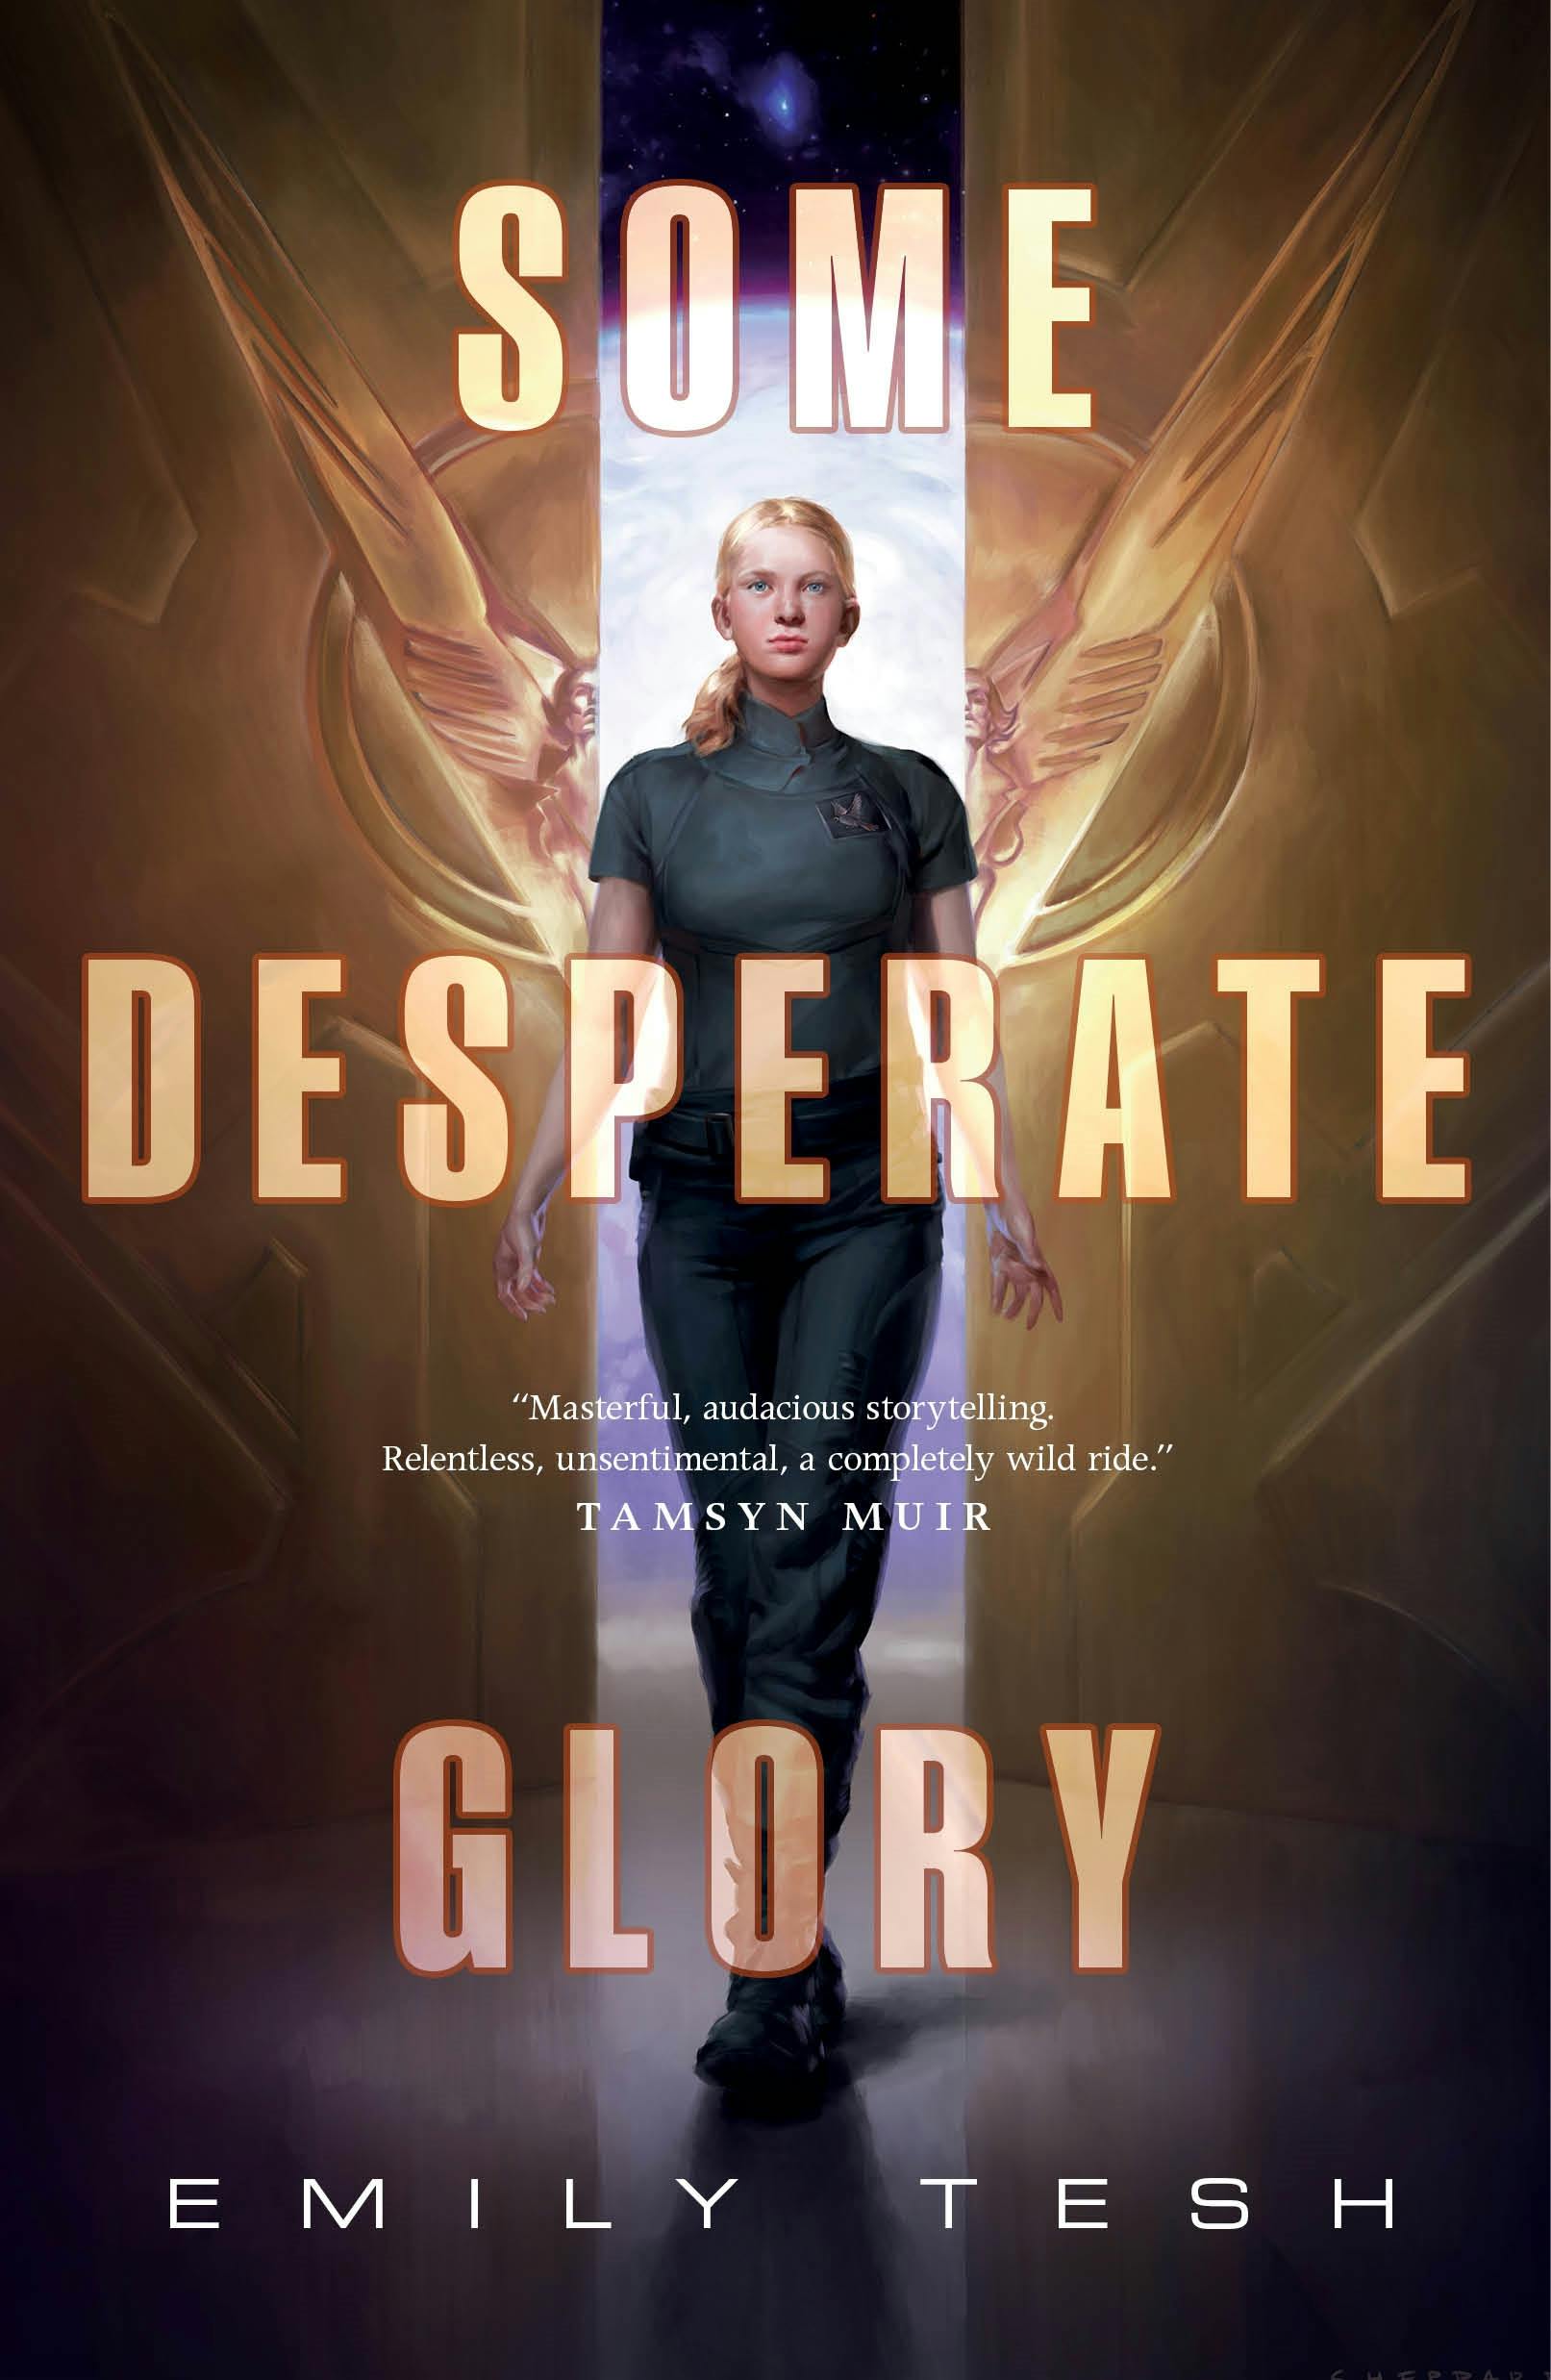 Cover for the book titled as: Some Desperate Glory